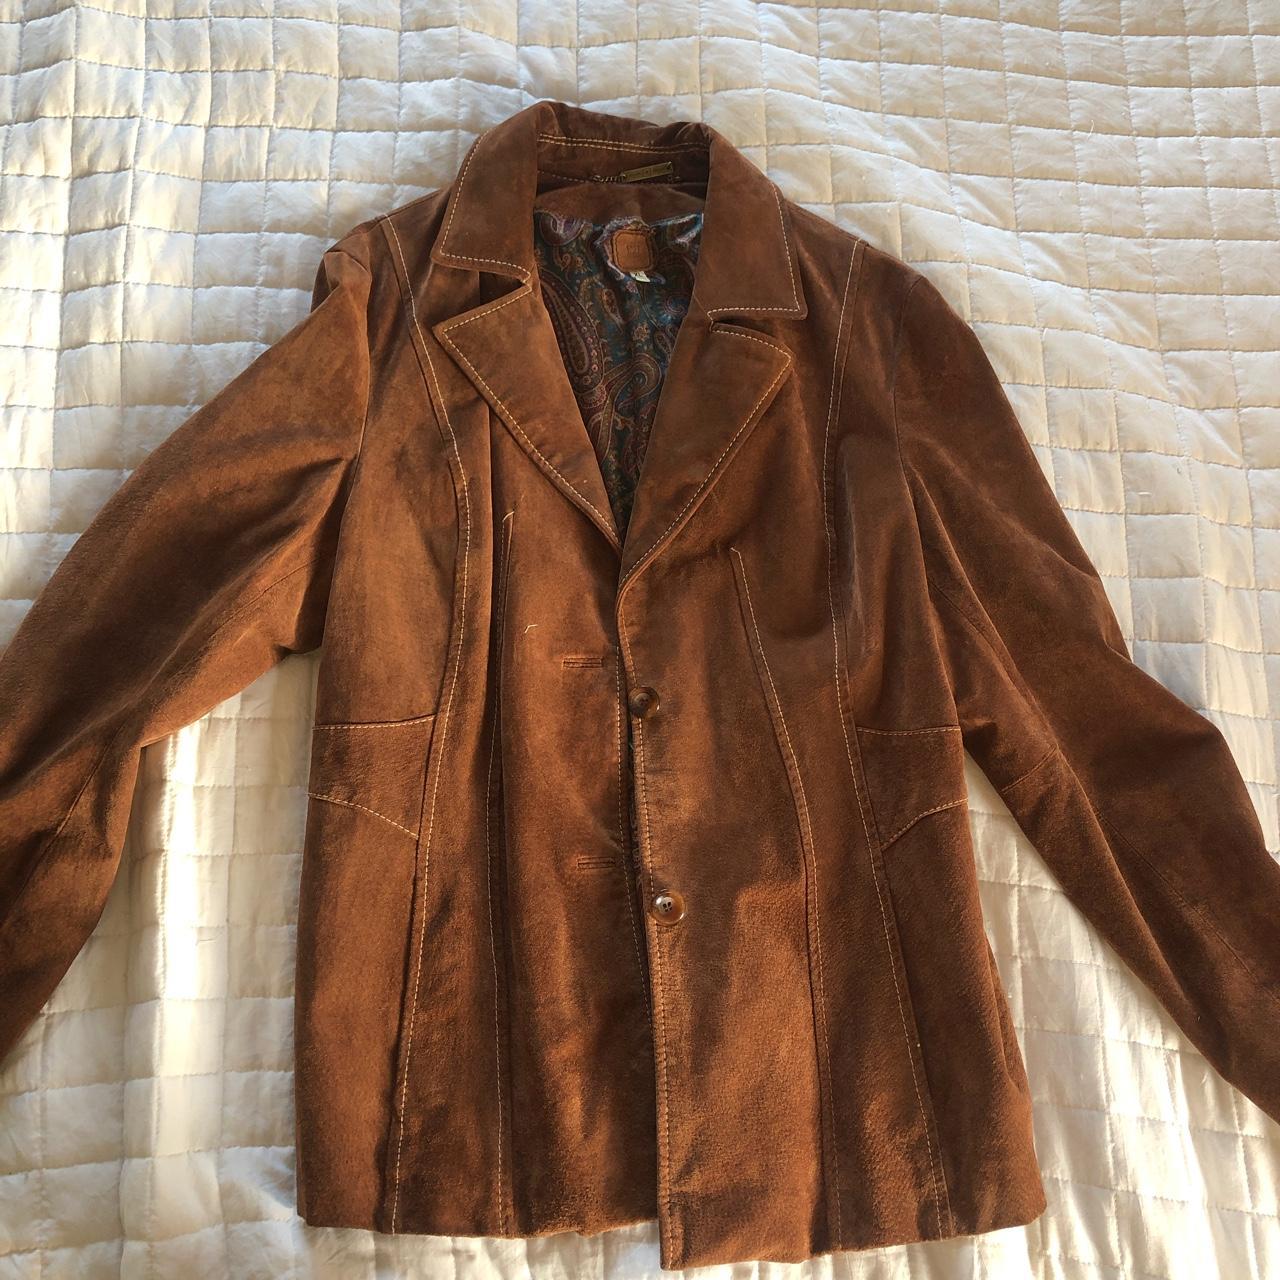 Wilson’s Leather Men's Tan and Brown Jacket (2)